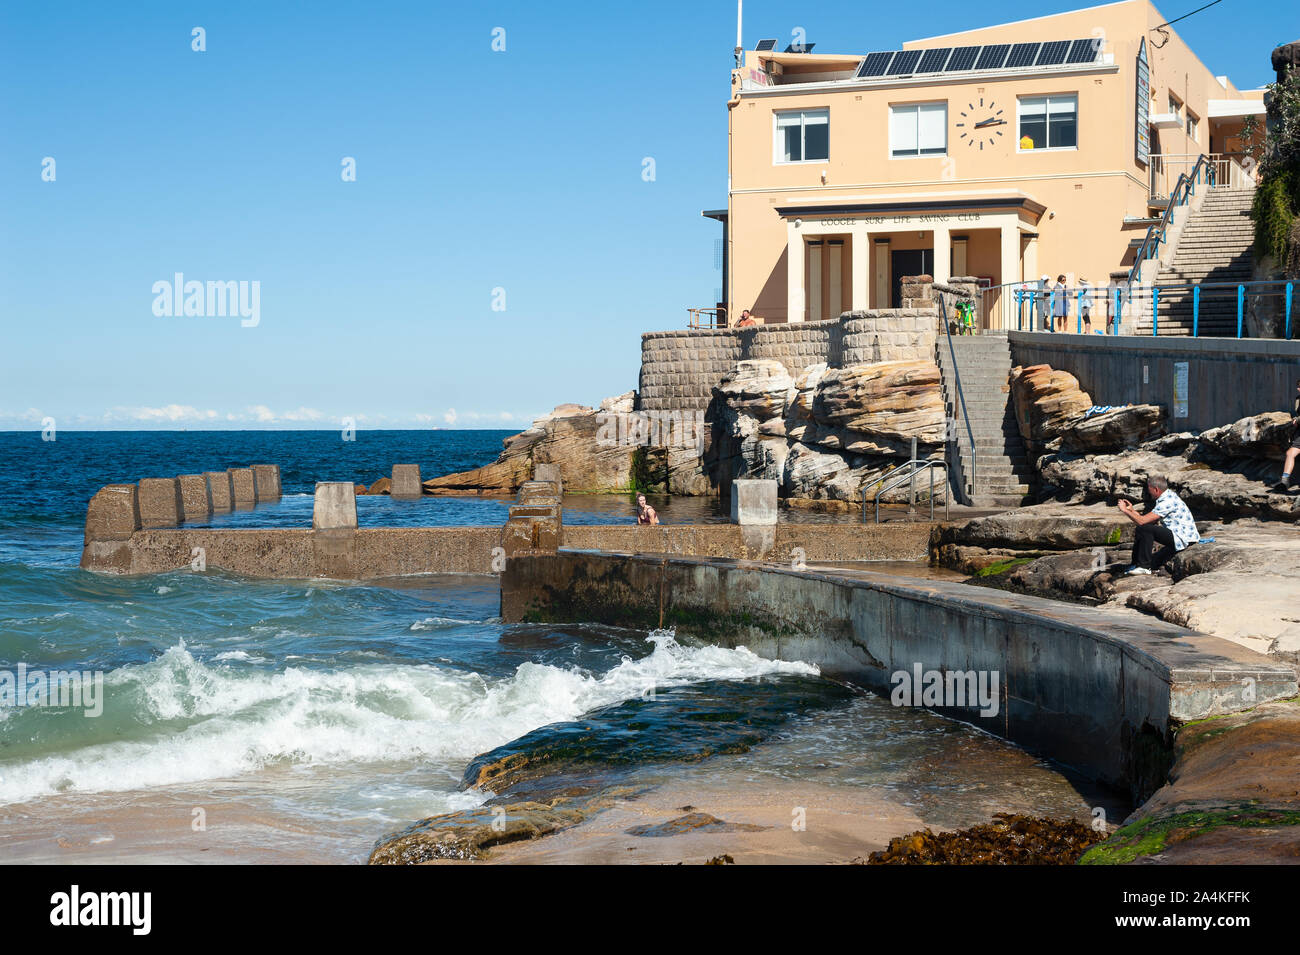 24.09.2019, Sydney, New South Wales, Australia - Ross Jones Memorial Pool at Coogee Beach and the building of the Coogee Surf Life Saving Club. Stock Photo